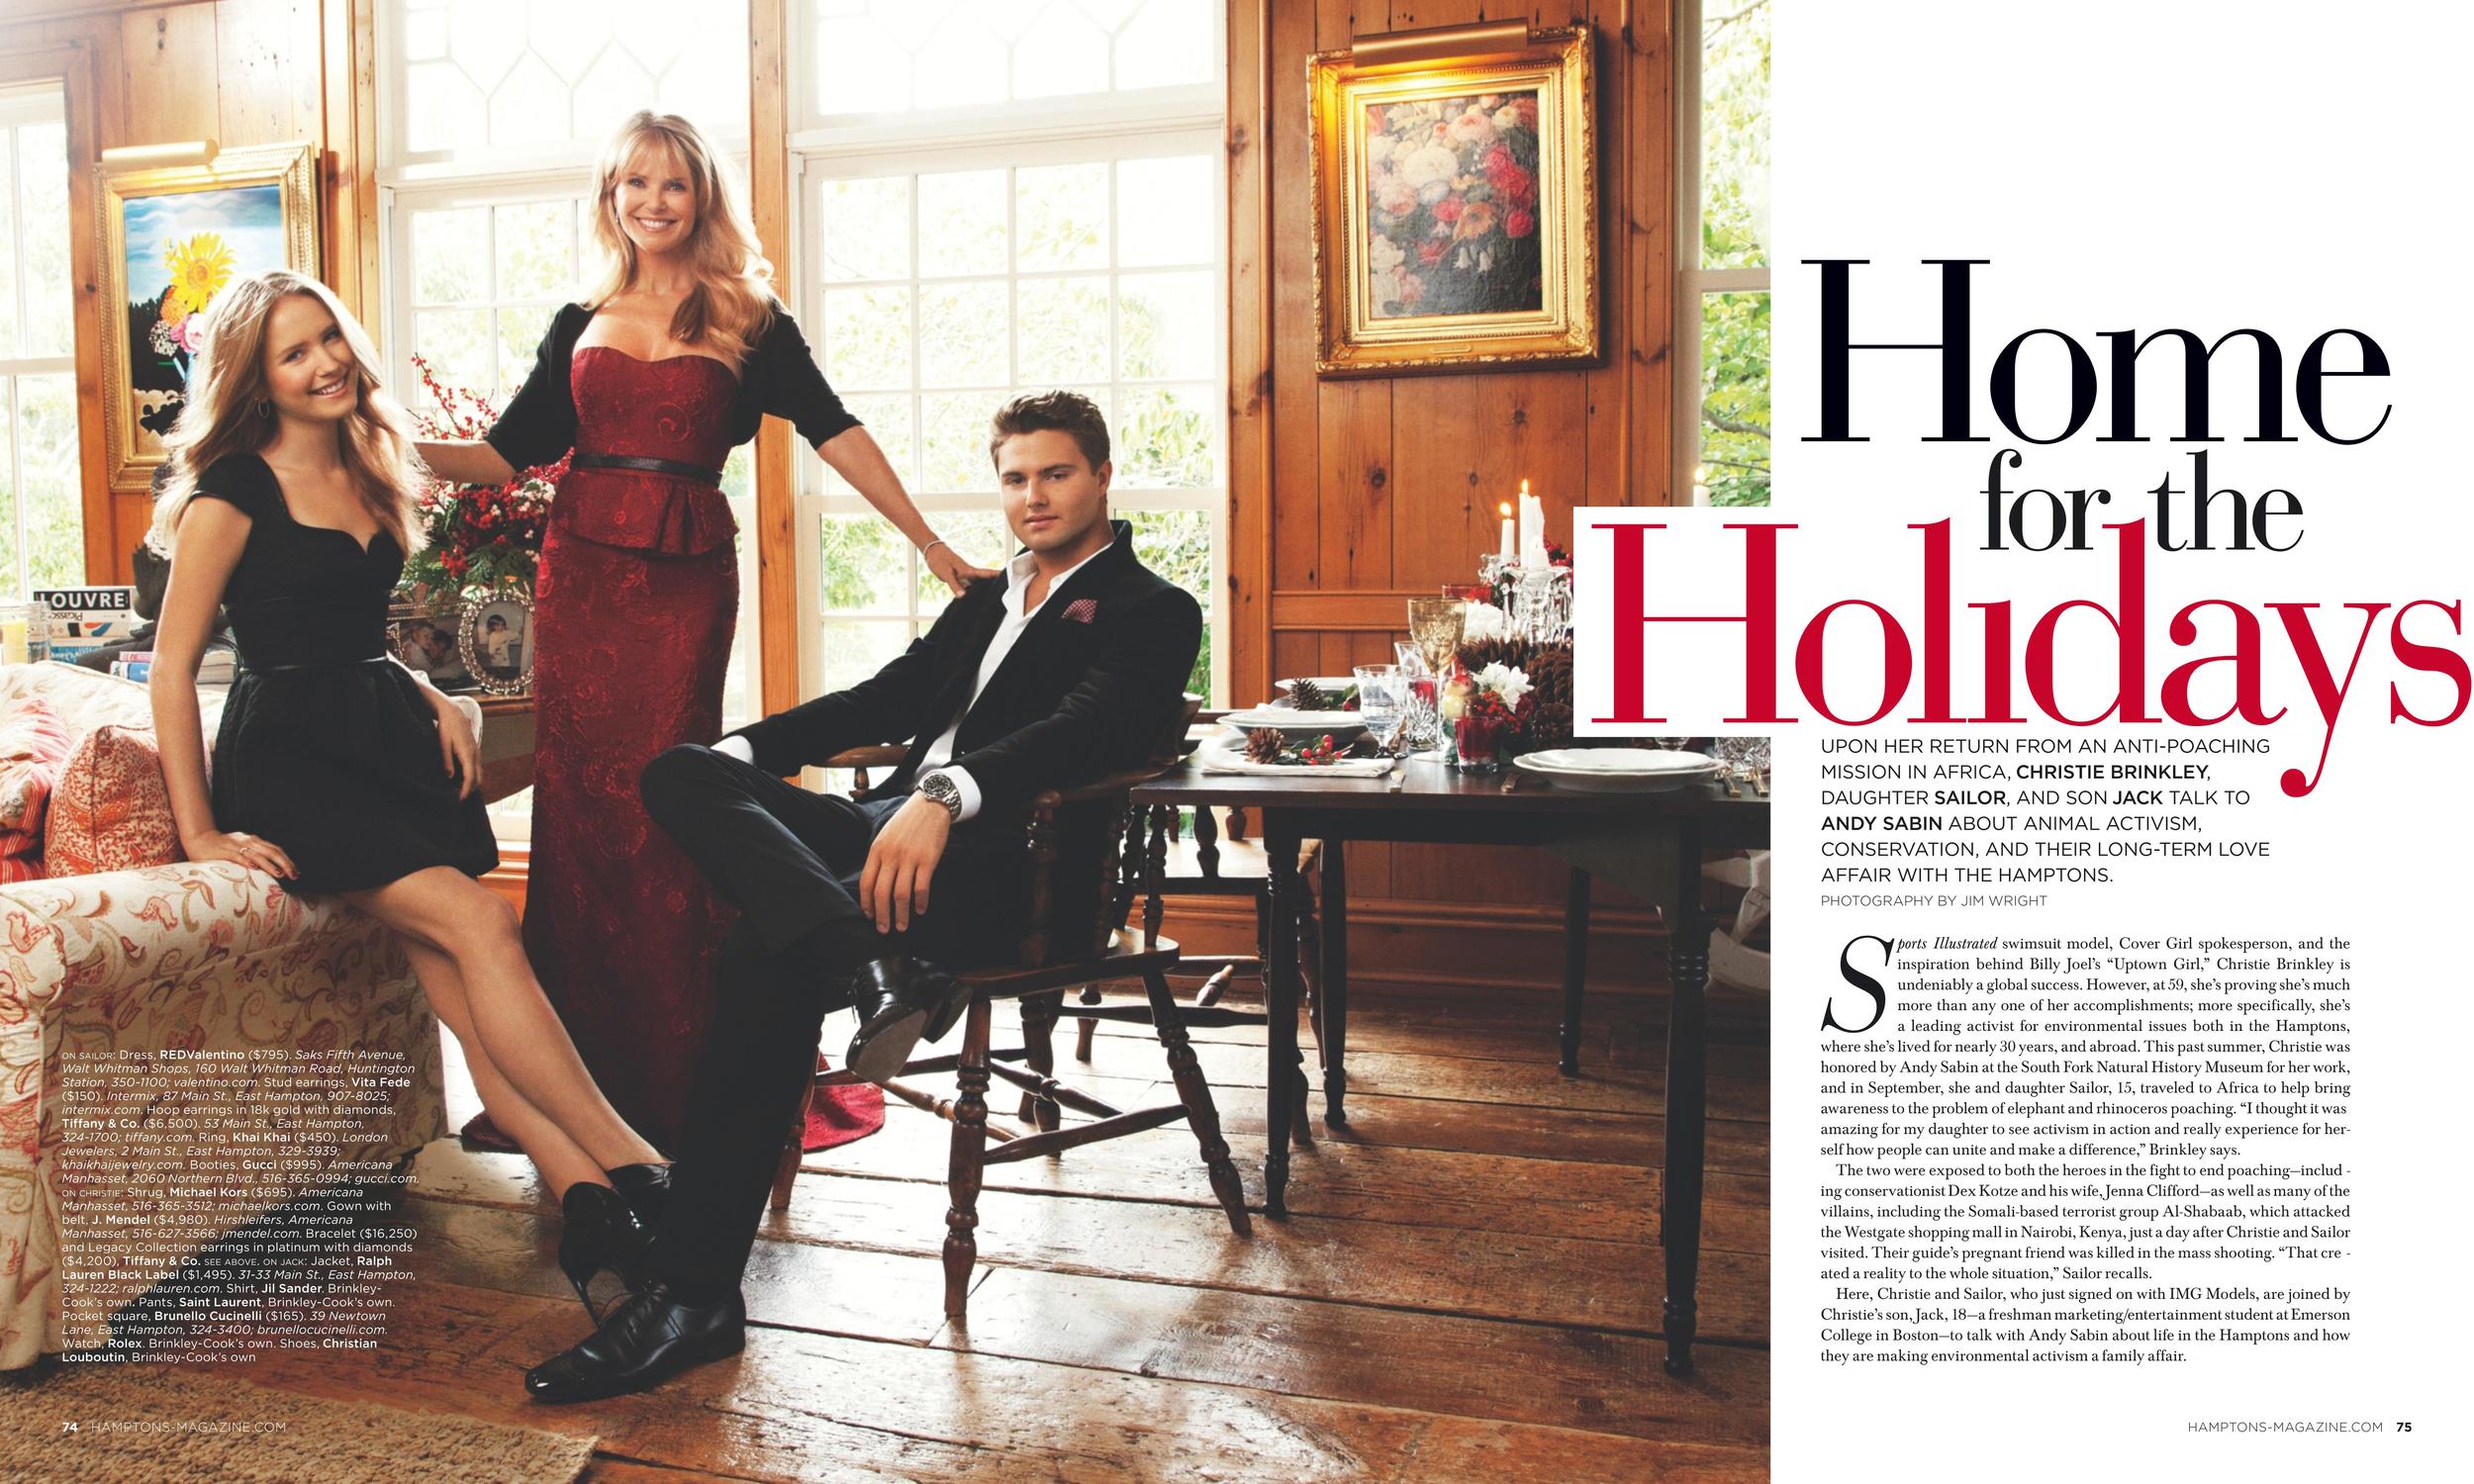 074-081_H_Feat_CoverStory_Holiday_13_1.jpg